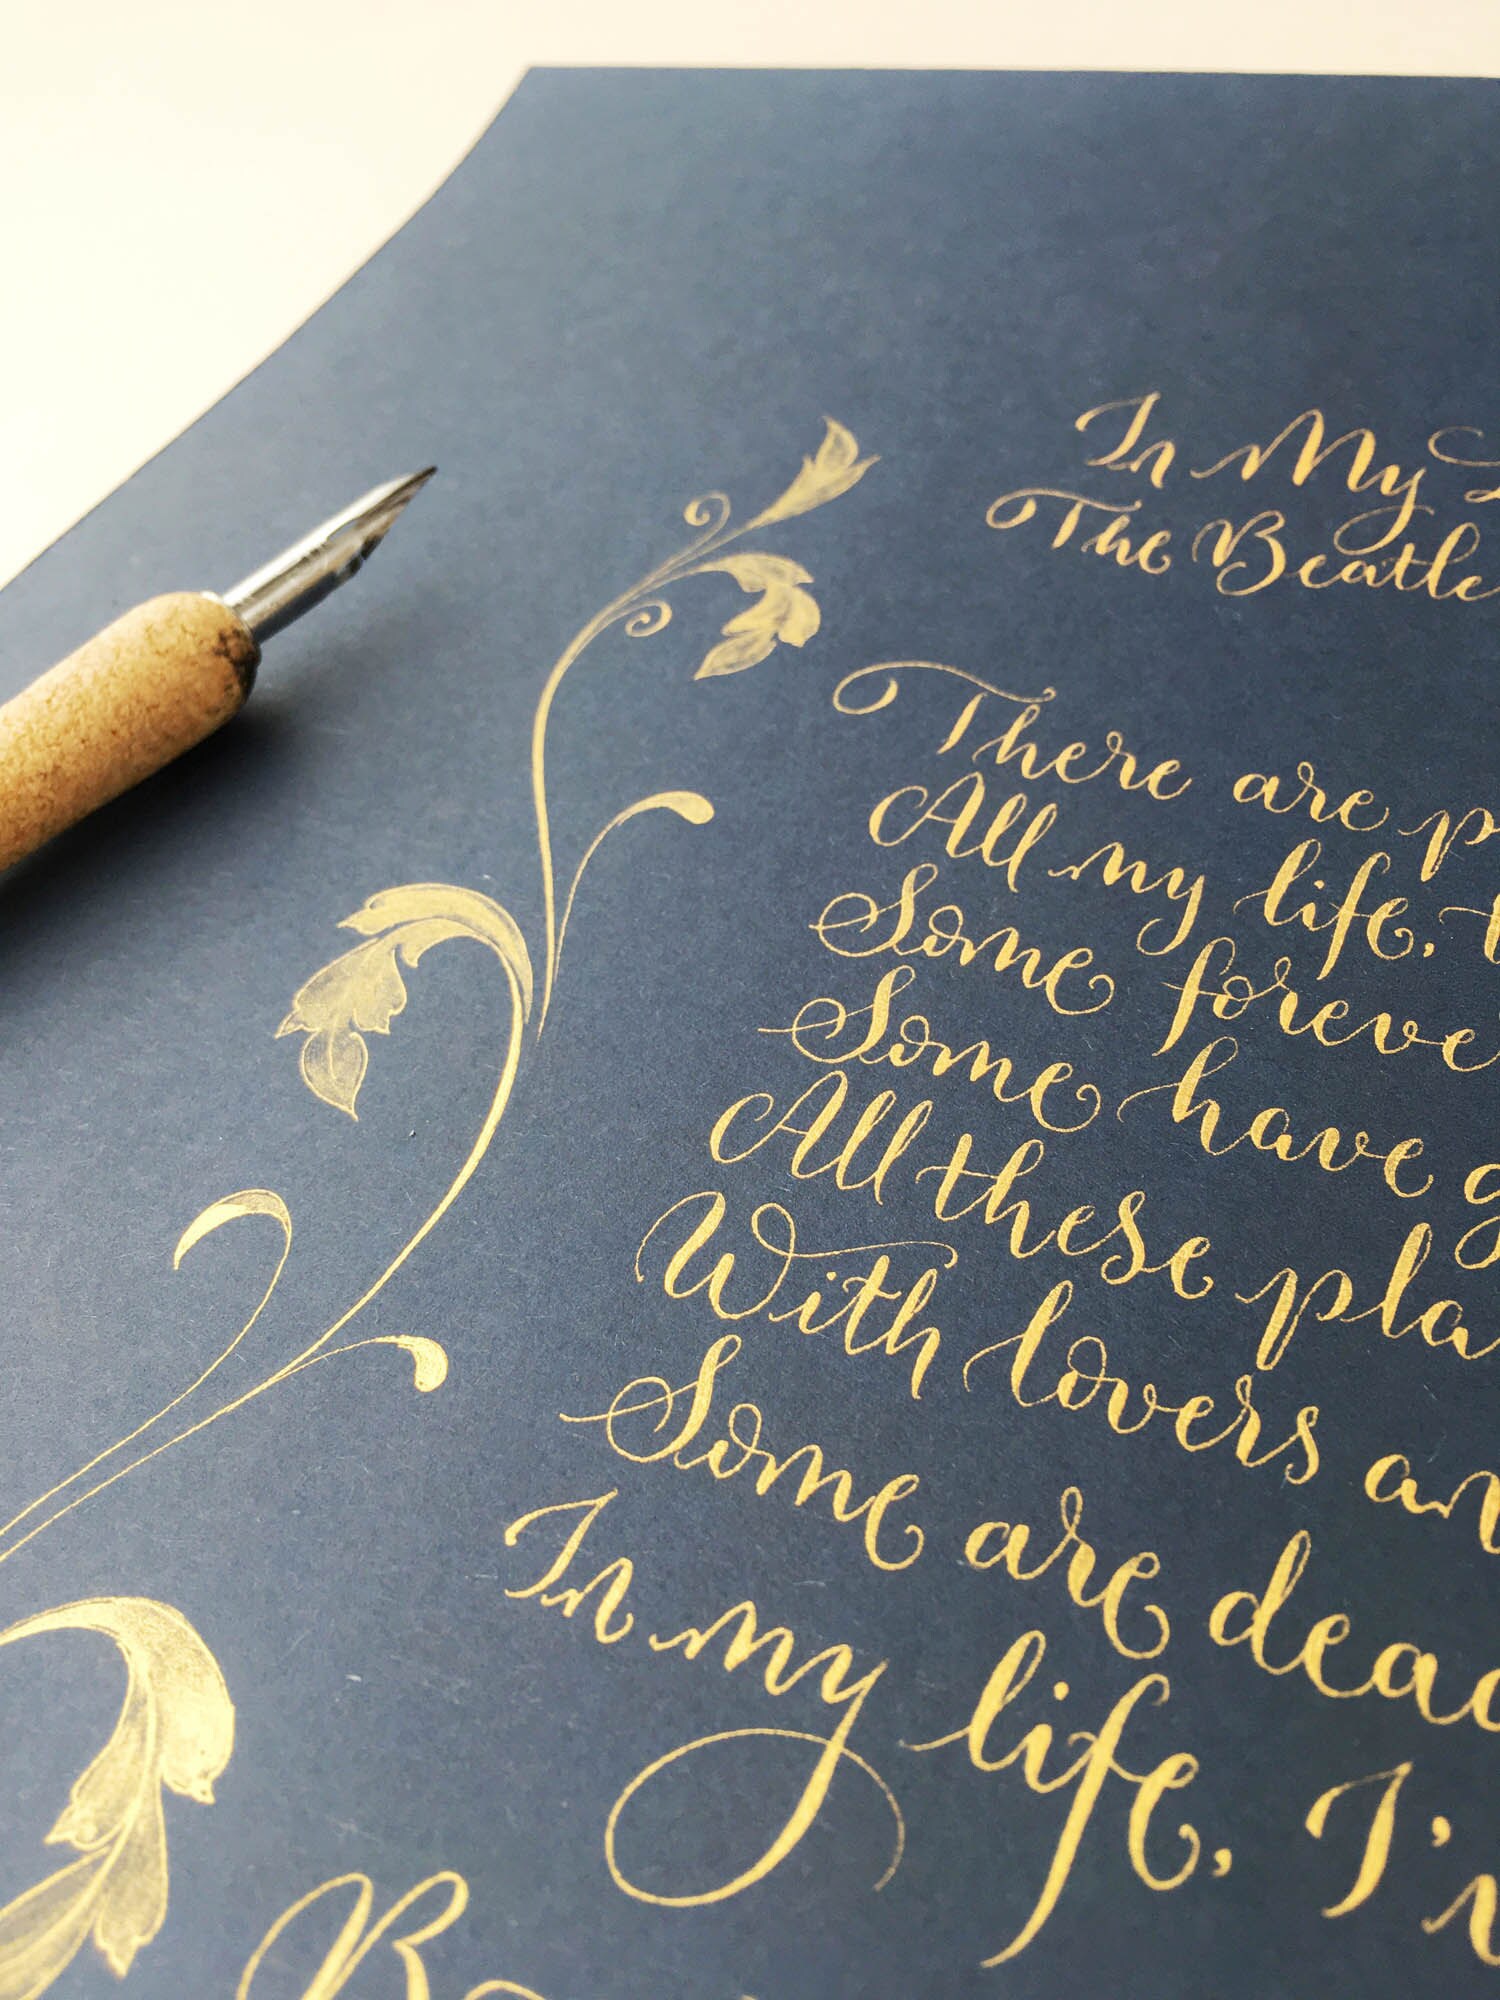 Straight modern calligraphy style with minimal flourishing and a classic gold border illustration